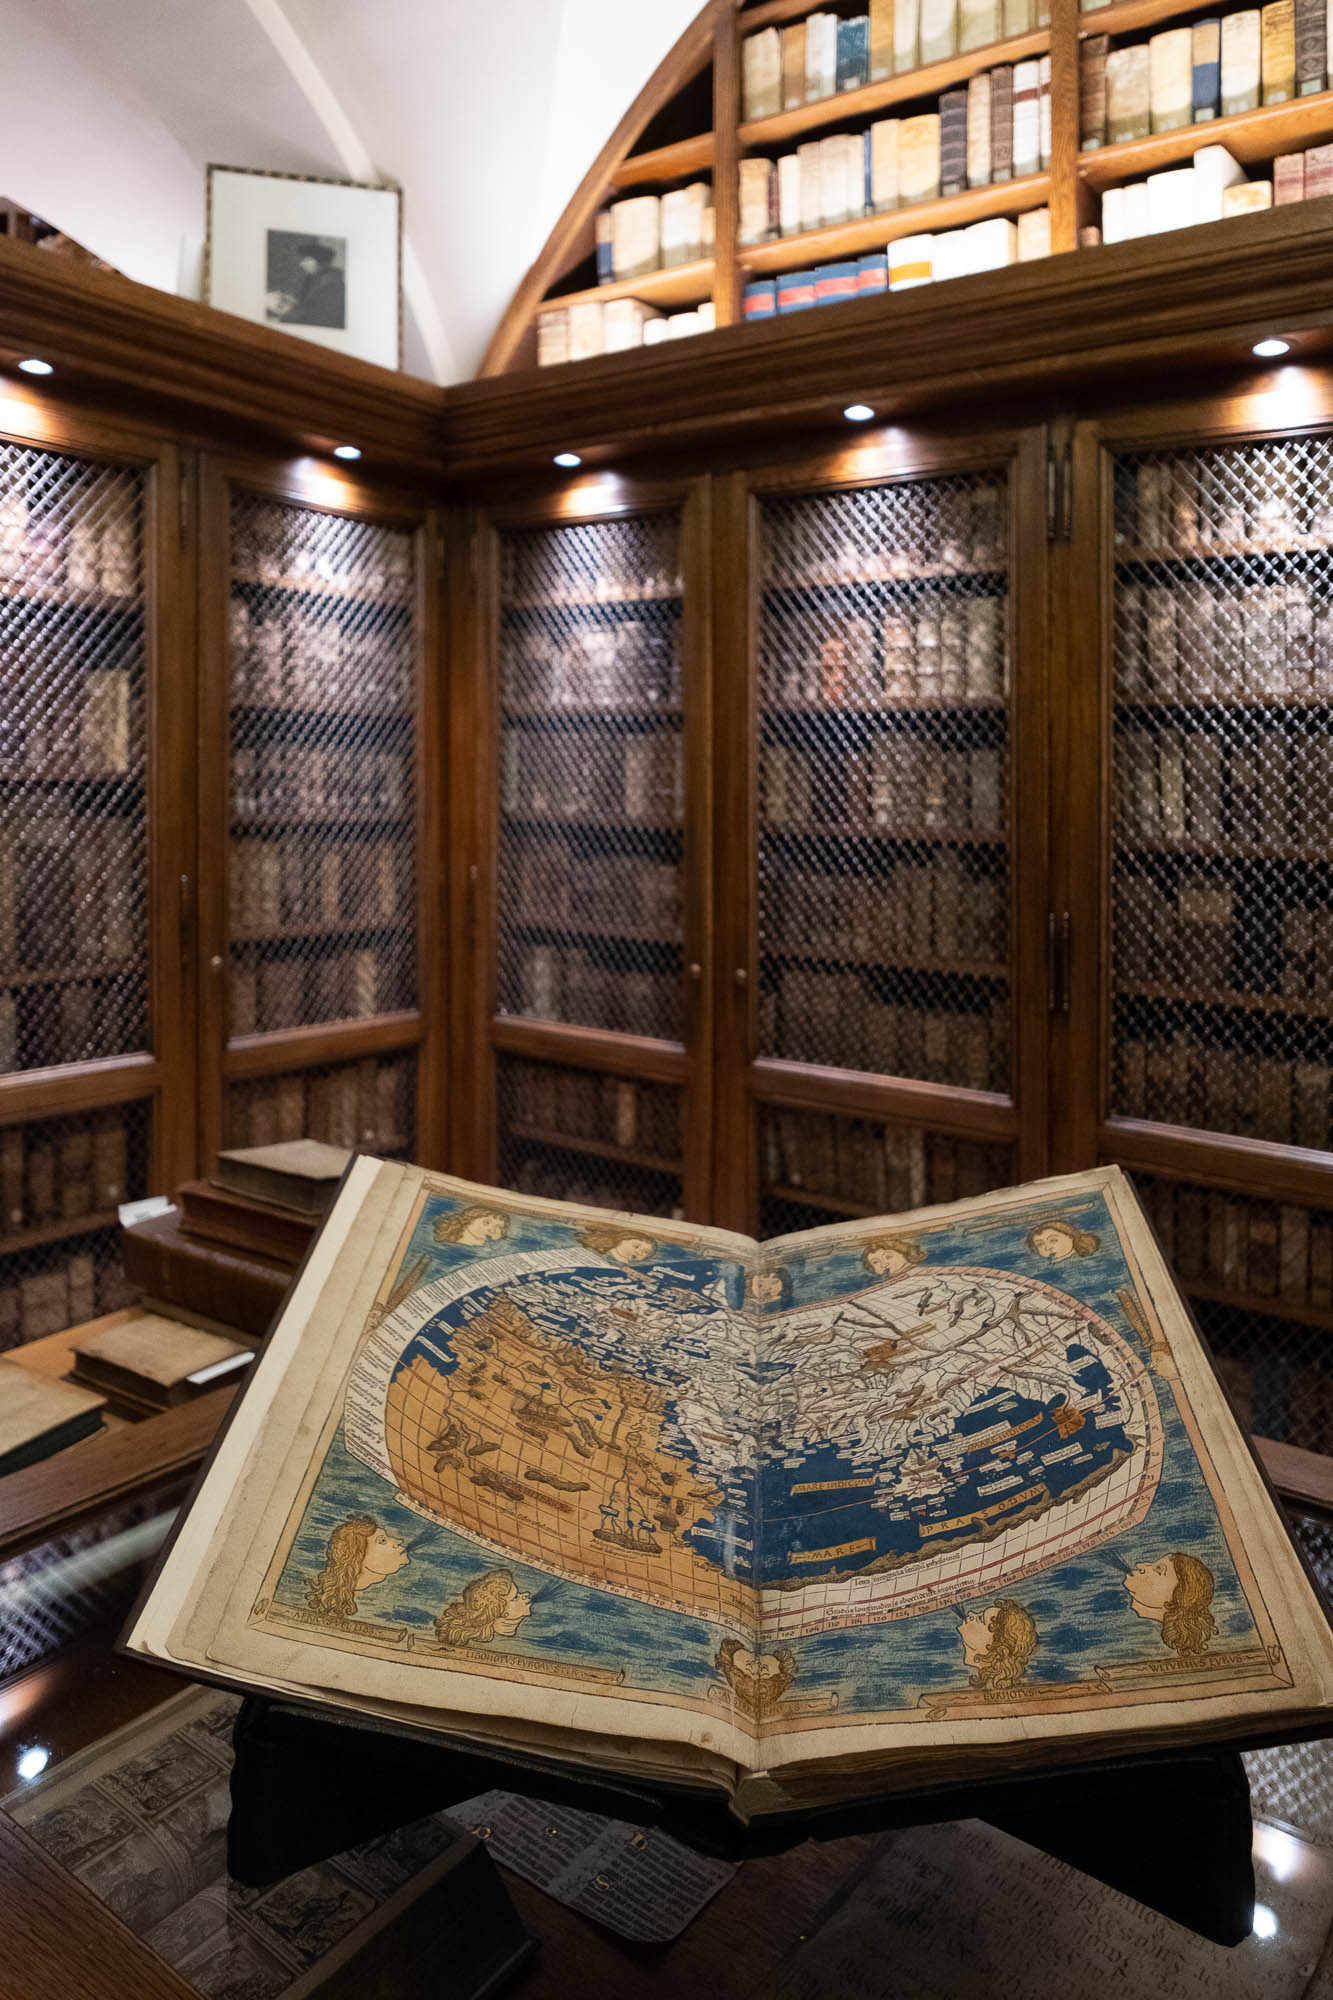 Interior of a rare book library with dark wood shelves filled with precious volumes behind protective netting. An ancient book is seen in the foreground, open to a page representing a map of Europe, Asia and Africa.